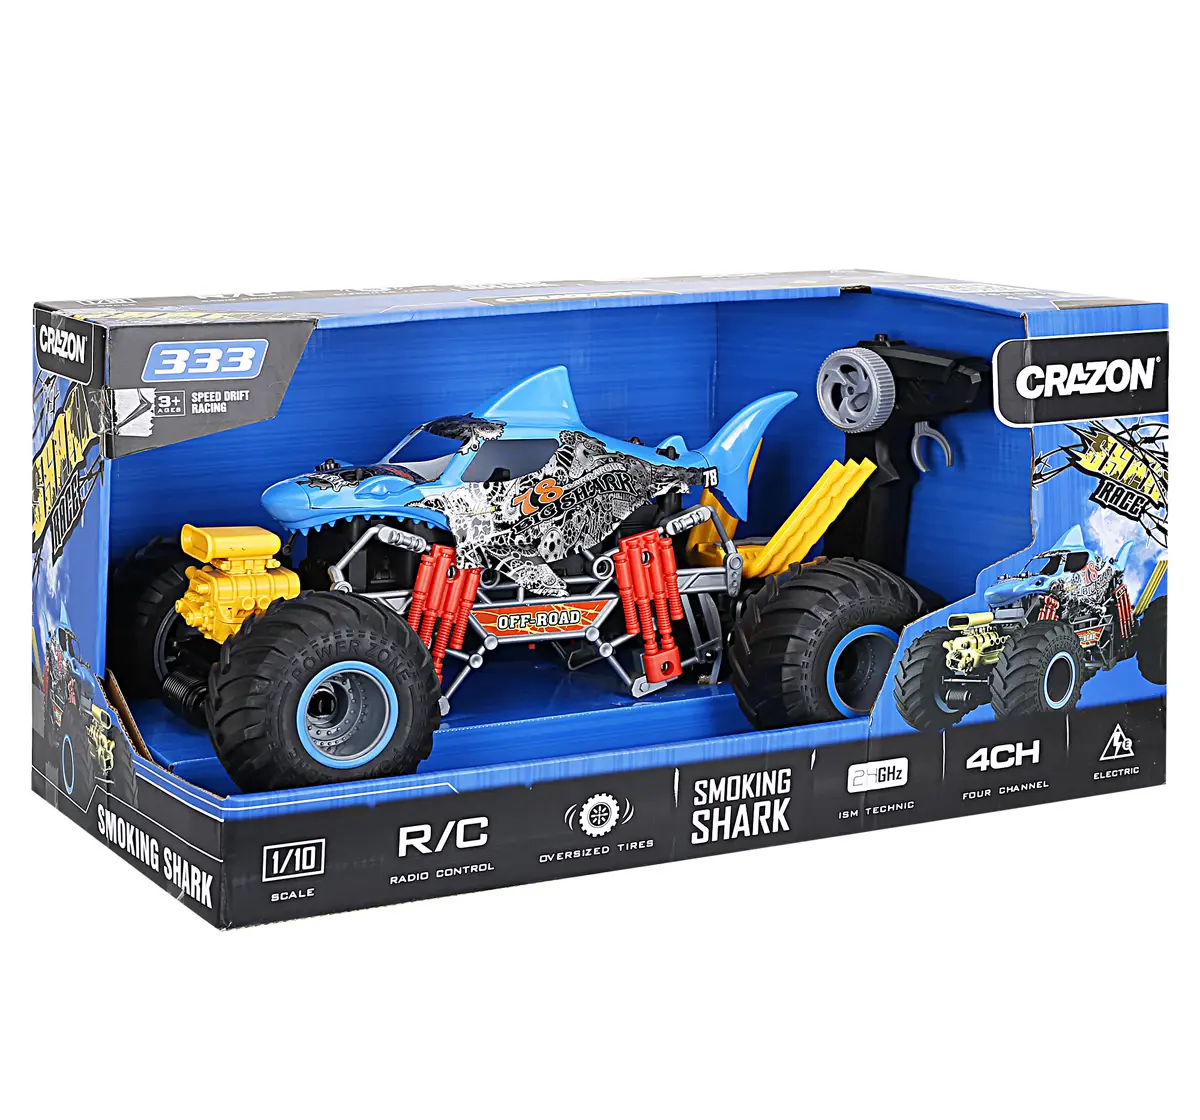 Ralleyz 2.4G 1:10 Shark With Smoking Blue Remote Control Car for kids 8Y+, Multicolour